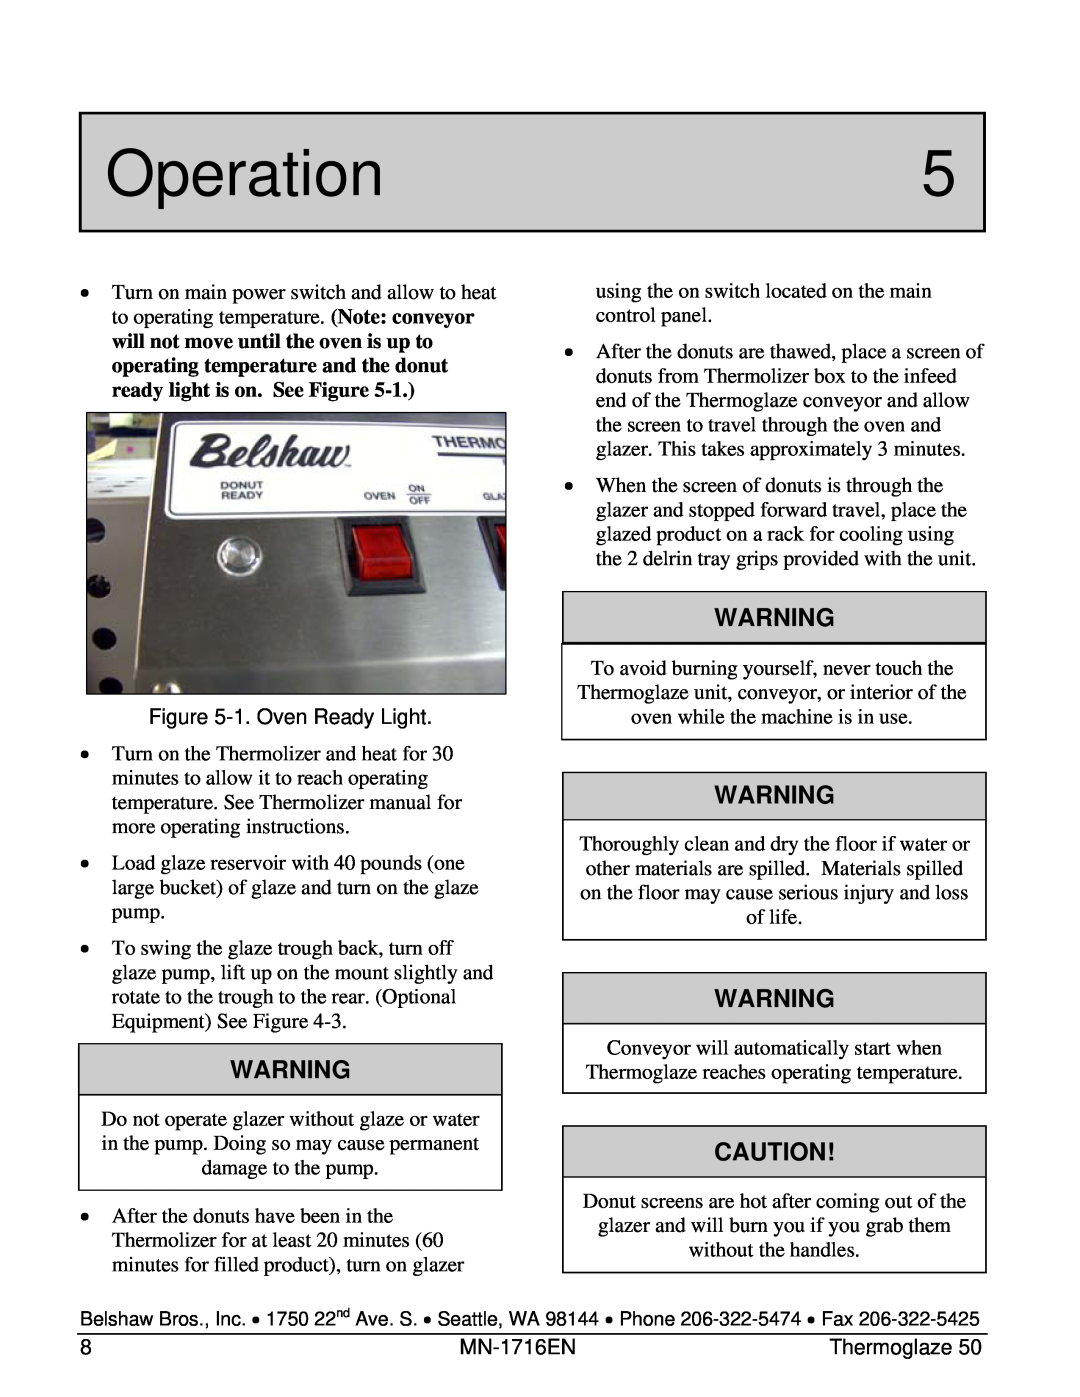 Belshaw Brothers TG 50 manual Operation5 